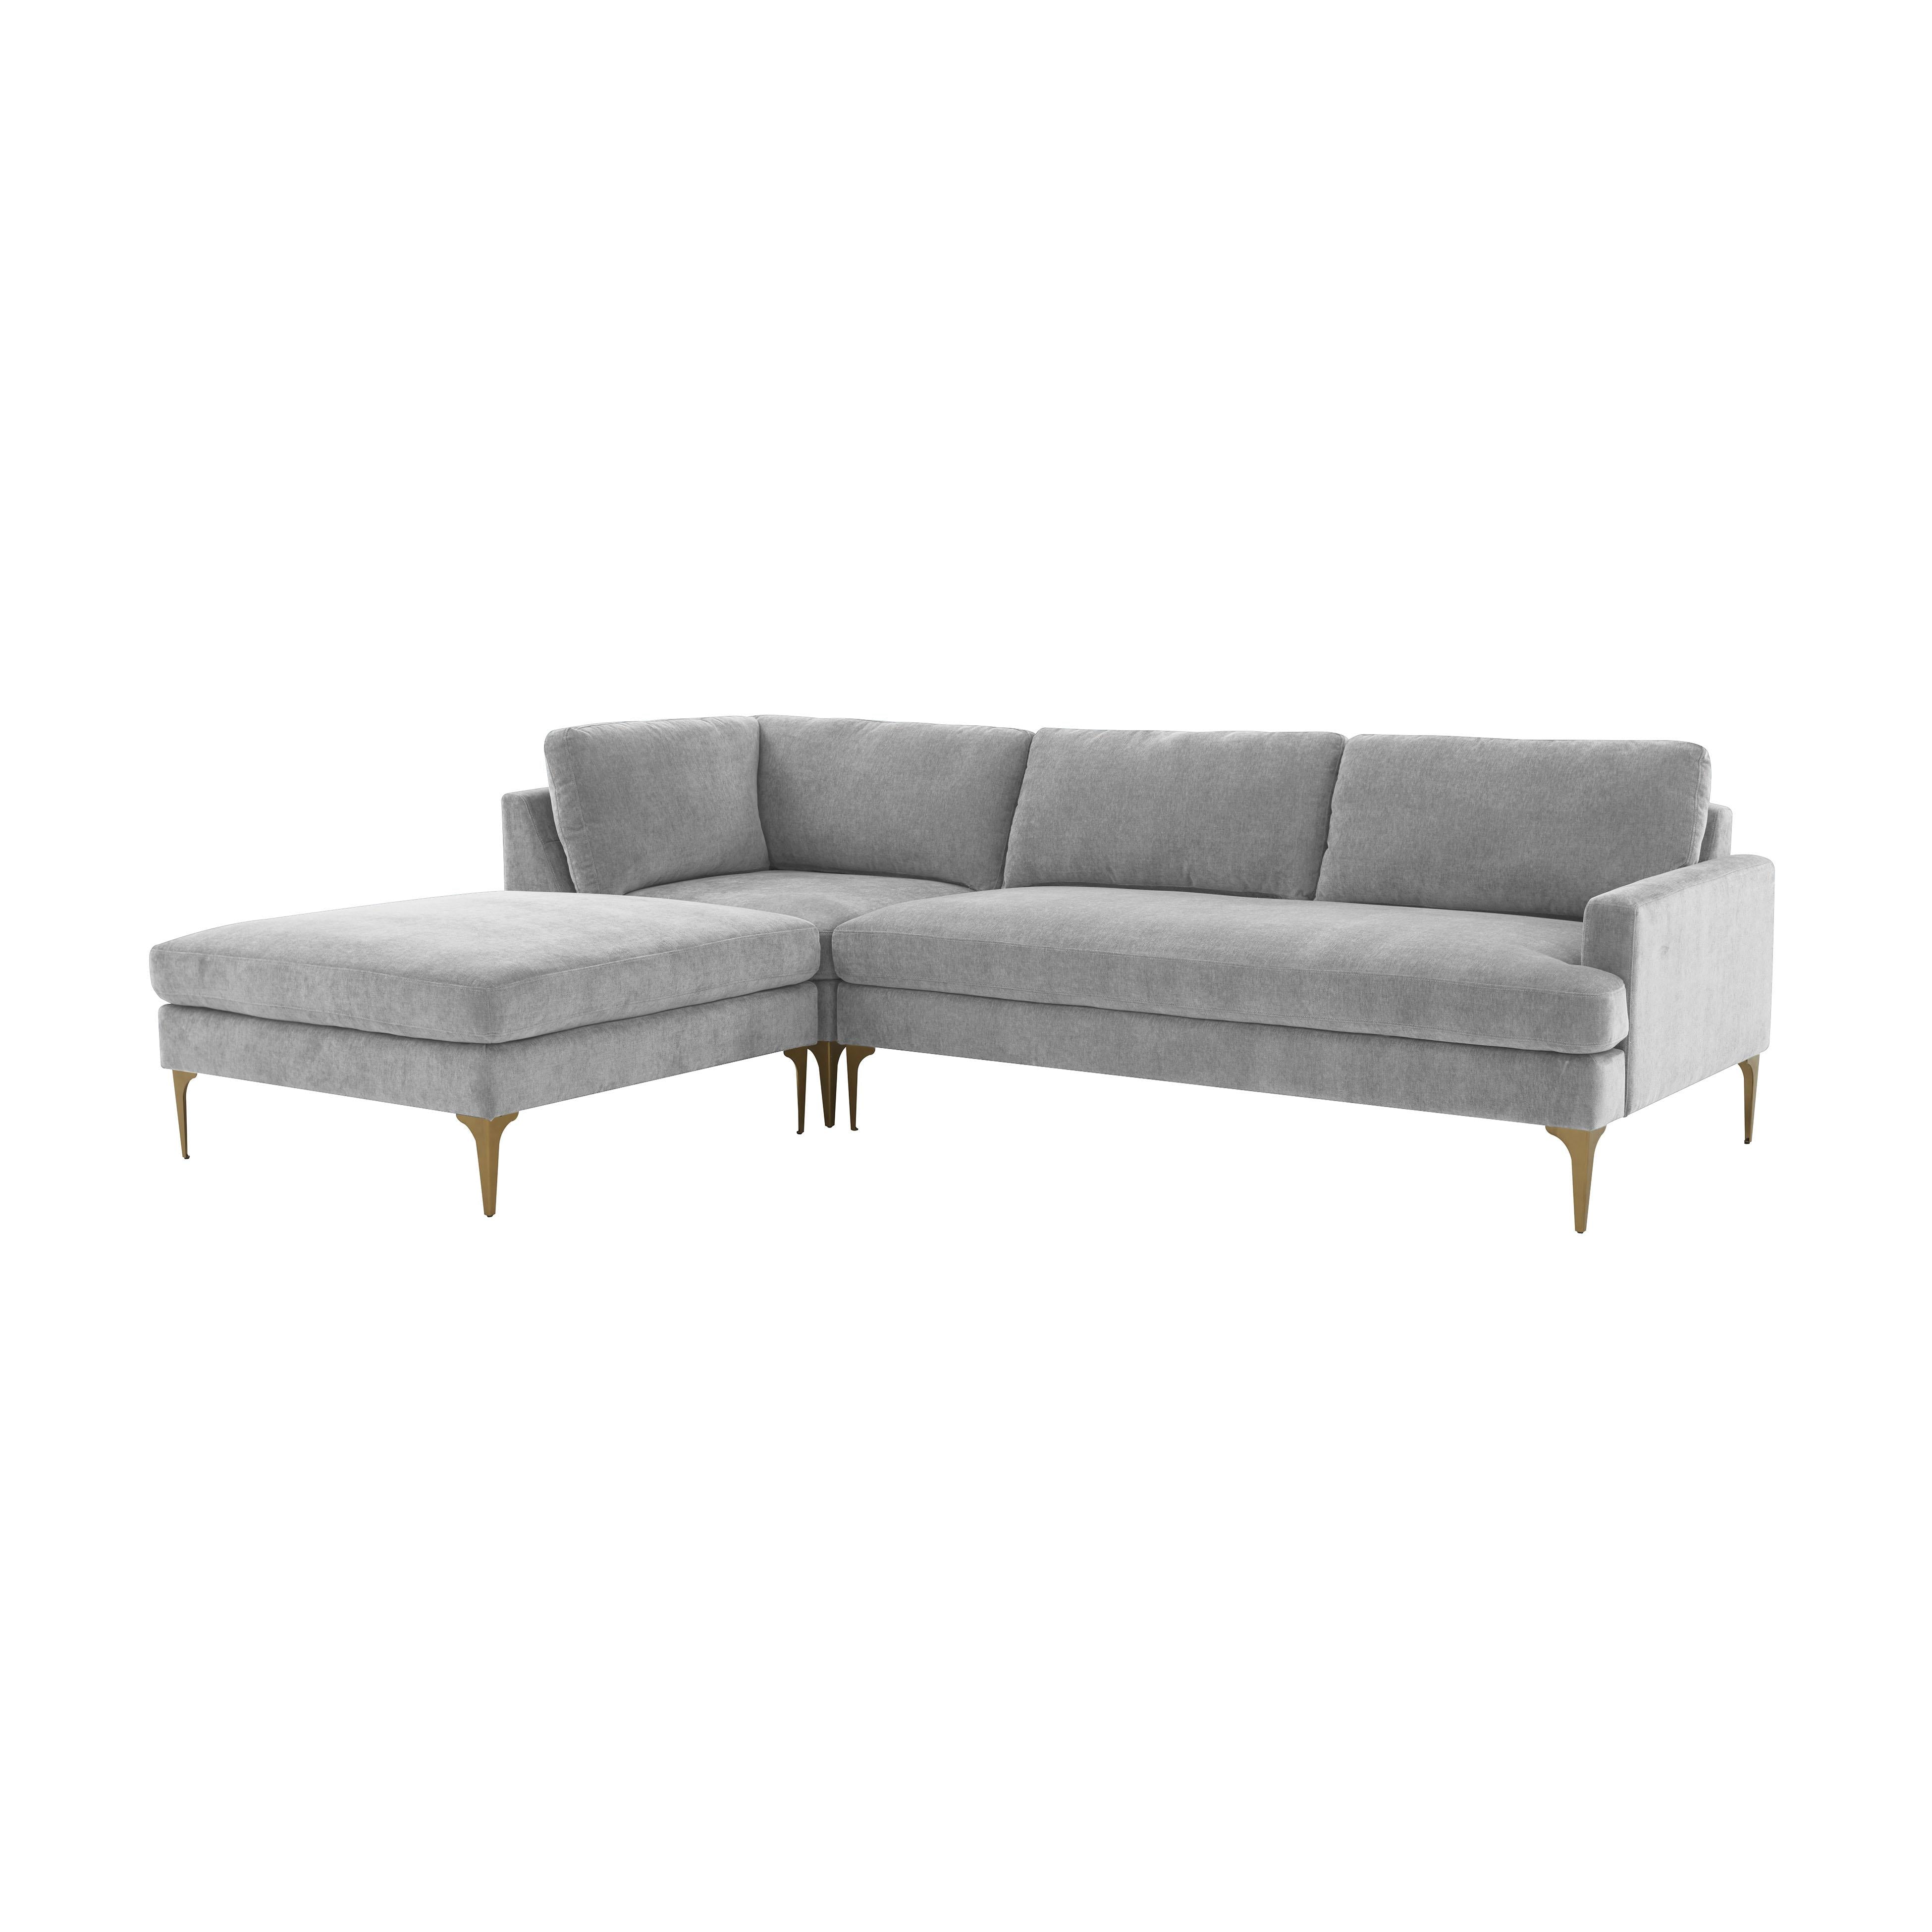 Tov Furniture Sectionals - Serena Gray Velvet LAF Chaise Sectional